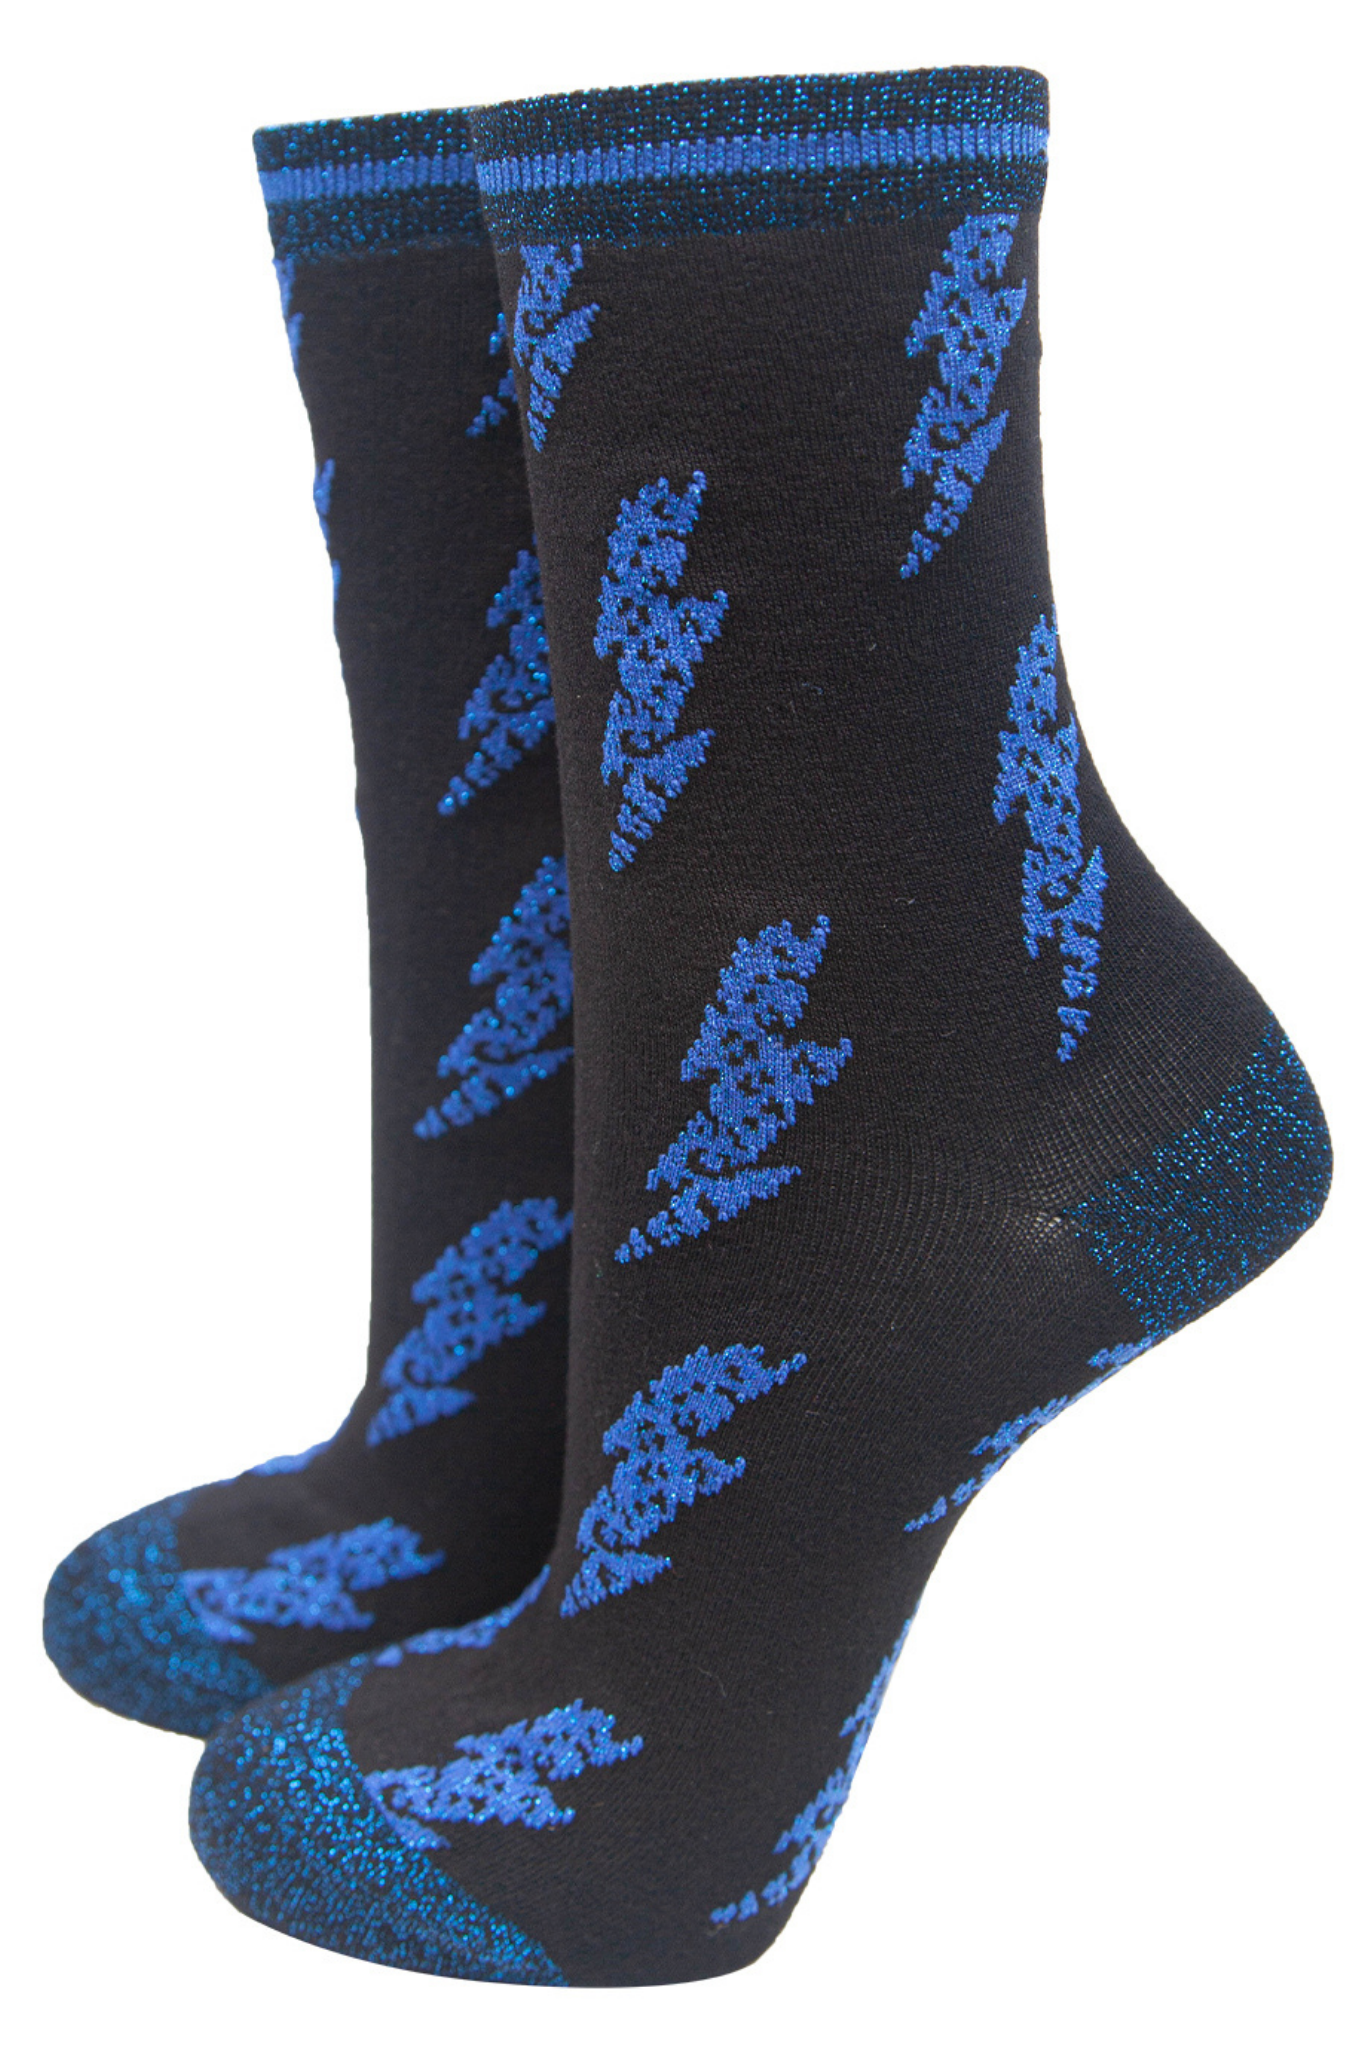 black ankle socks with blue lightning bolts all over and a blue glitter heel, toe and trim